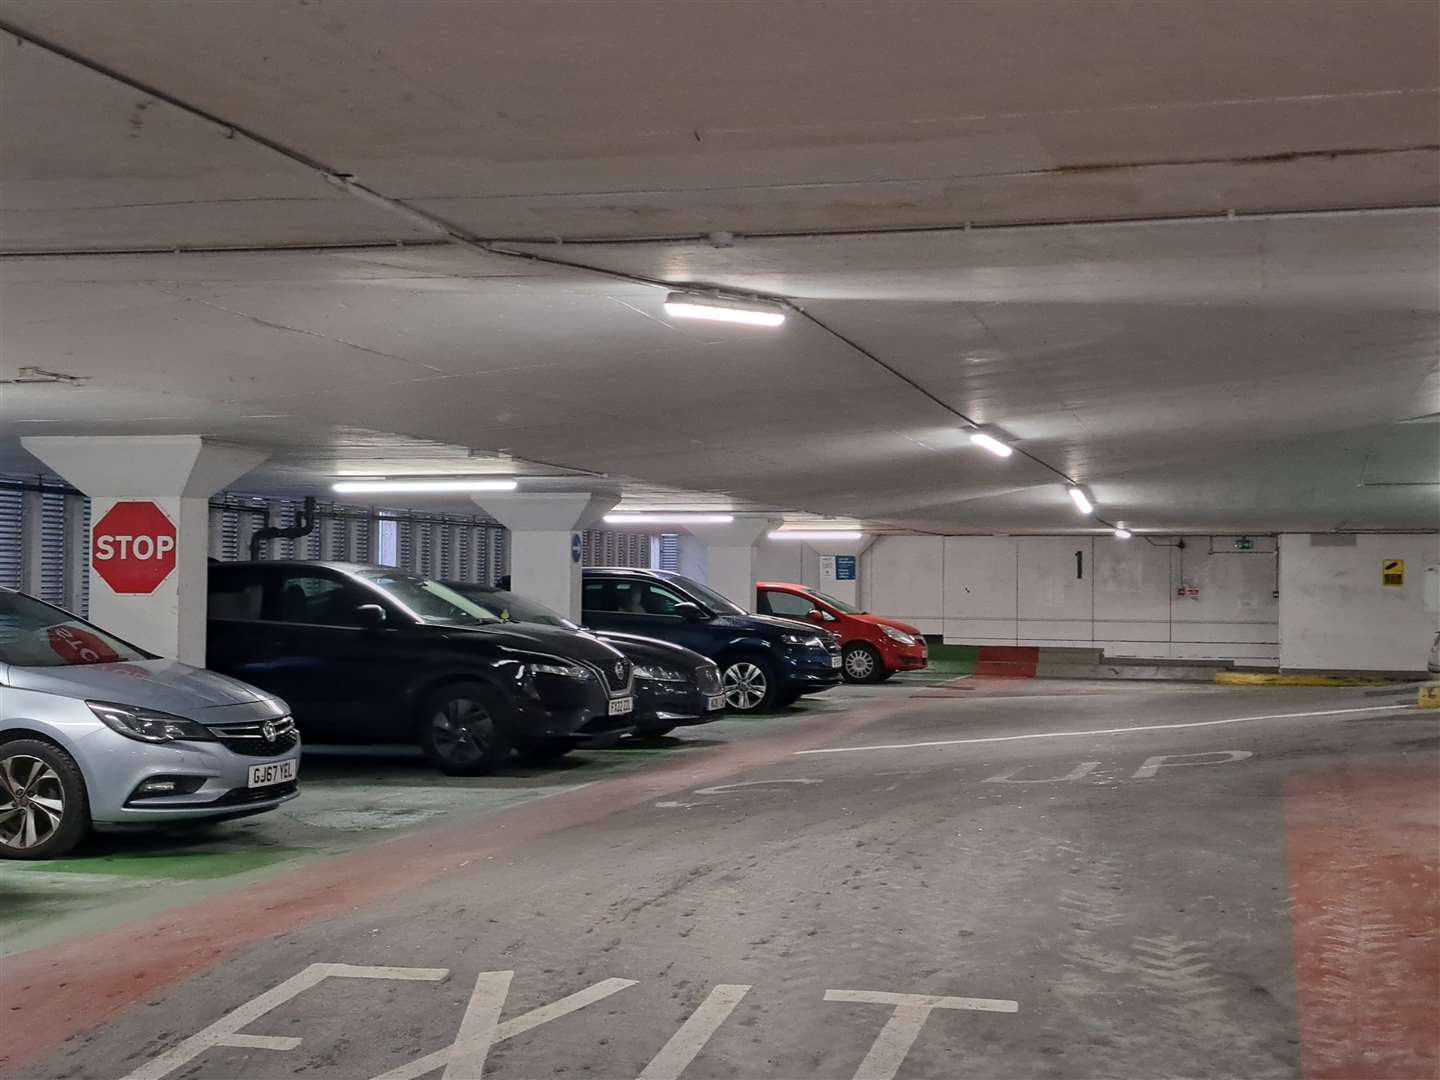 Edinburgh Road car park in Ashford has reopened after six months